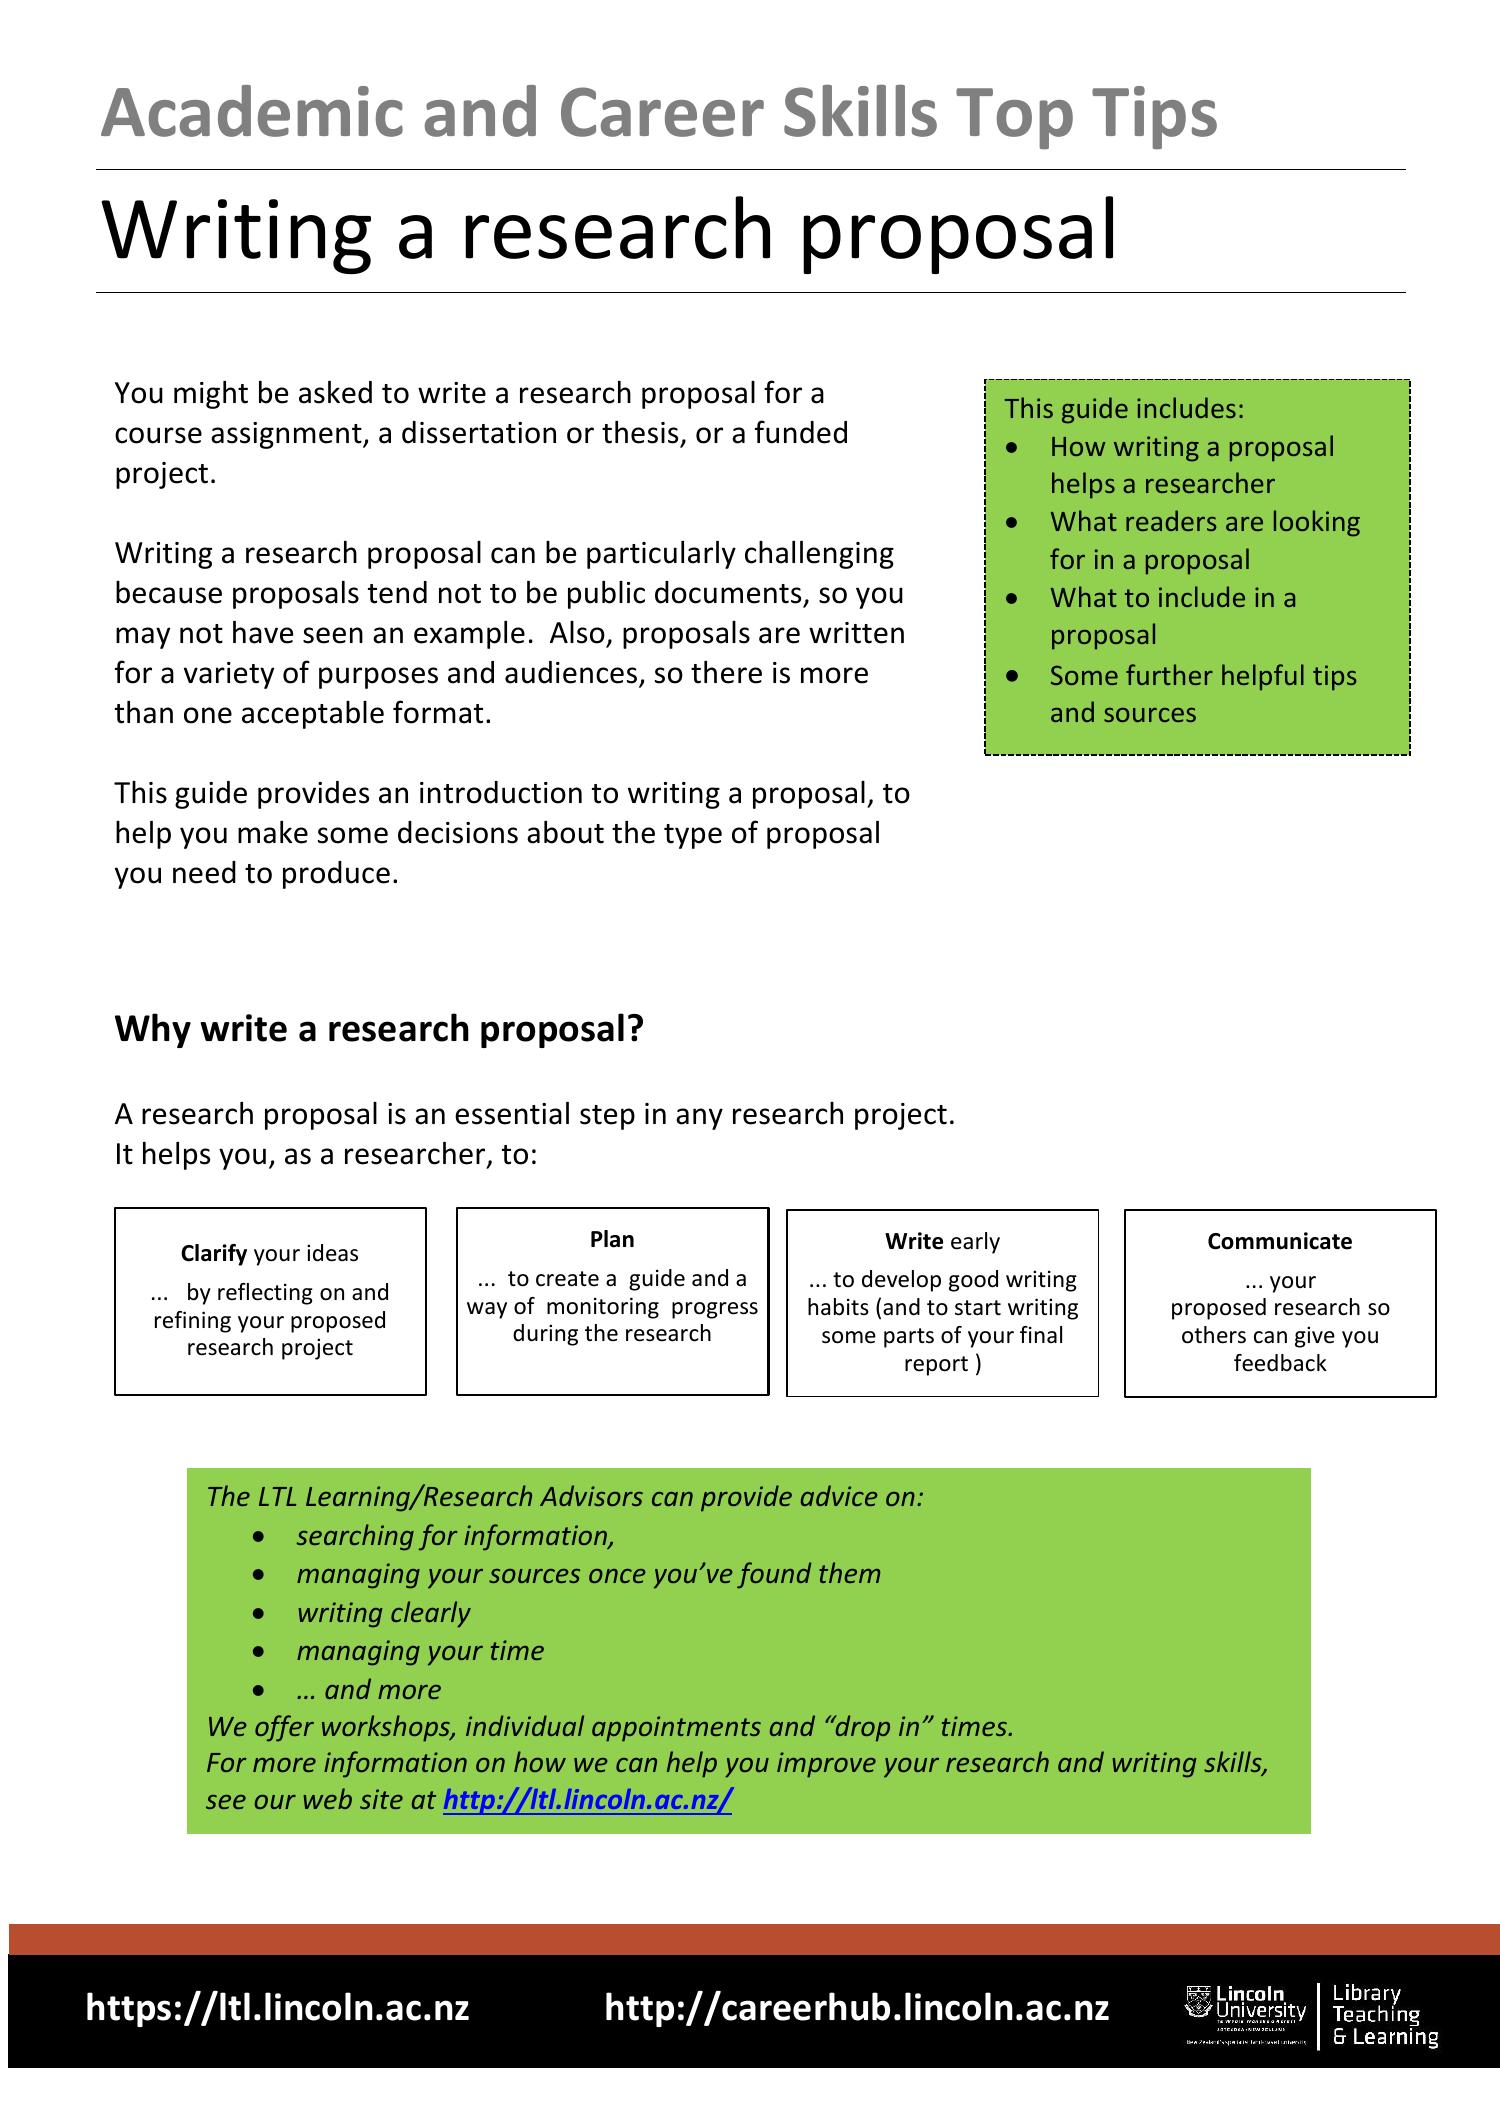 steps involved in writing a research proposal pdf